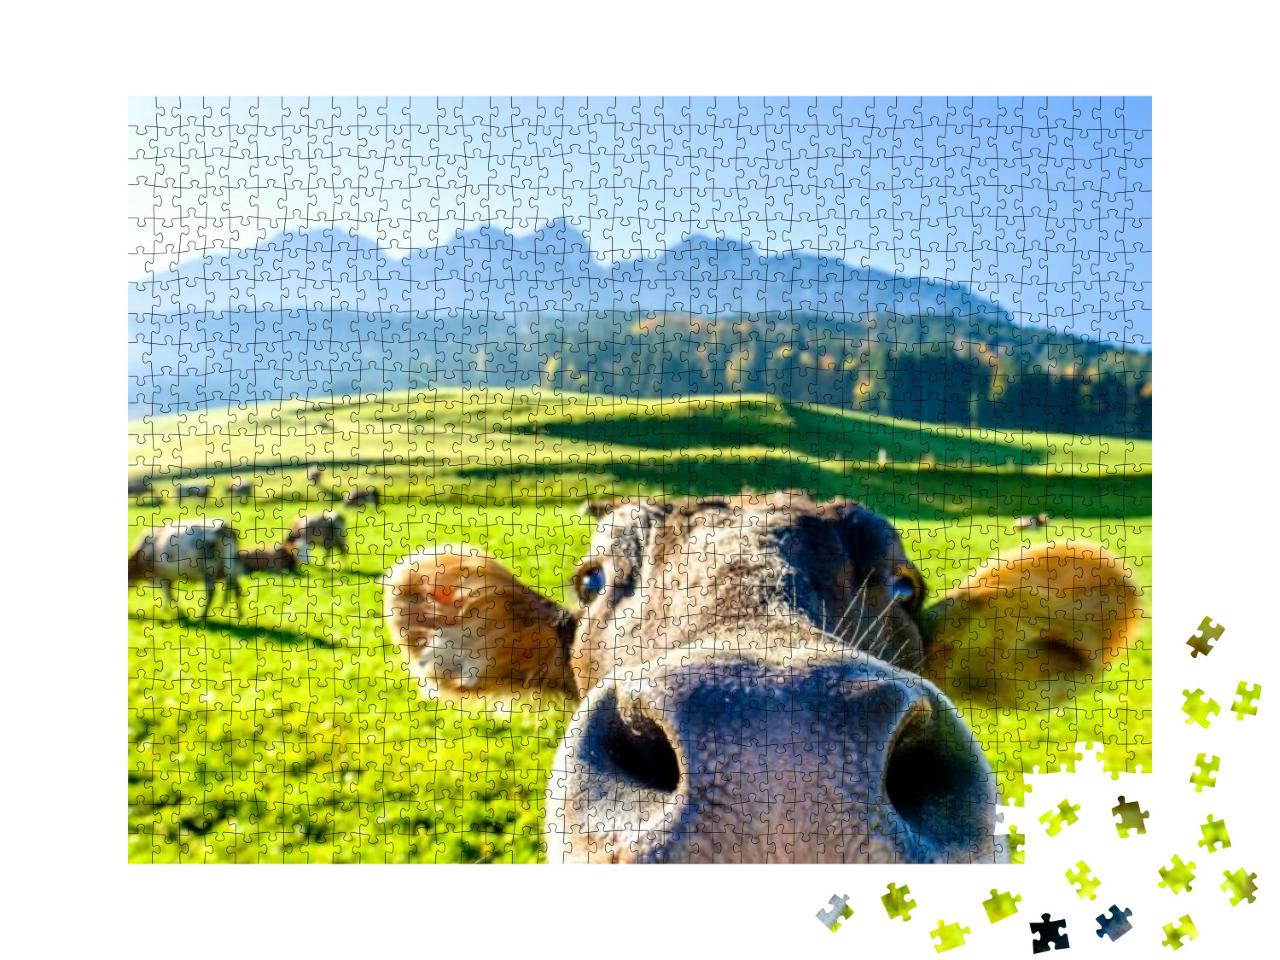 Funny Cow At the Kaisergebirge Mountain... Jigsaw Puzzle with 1000 pieces